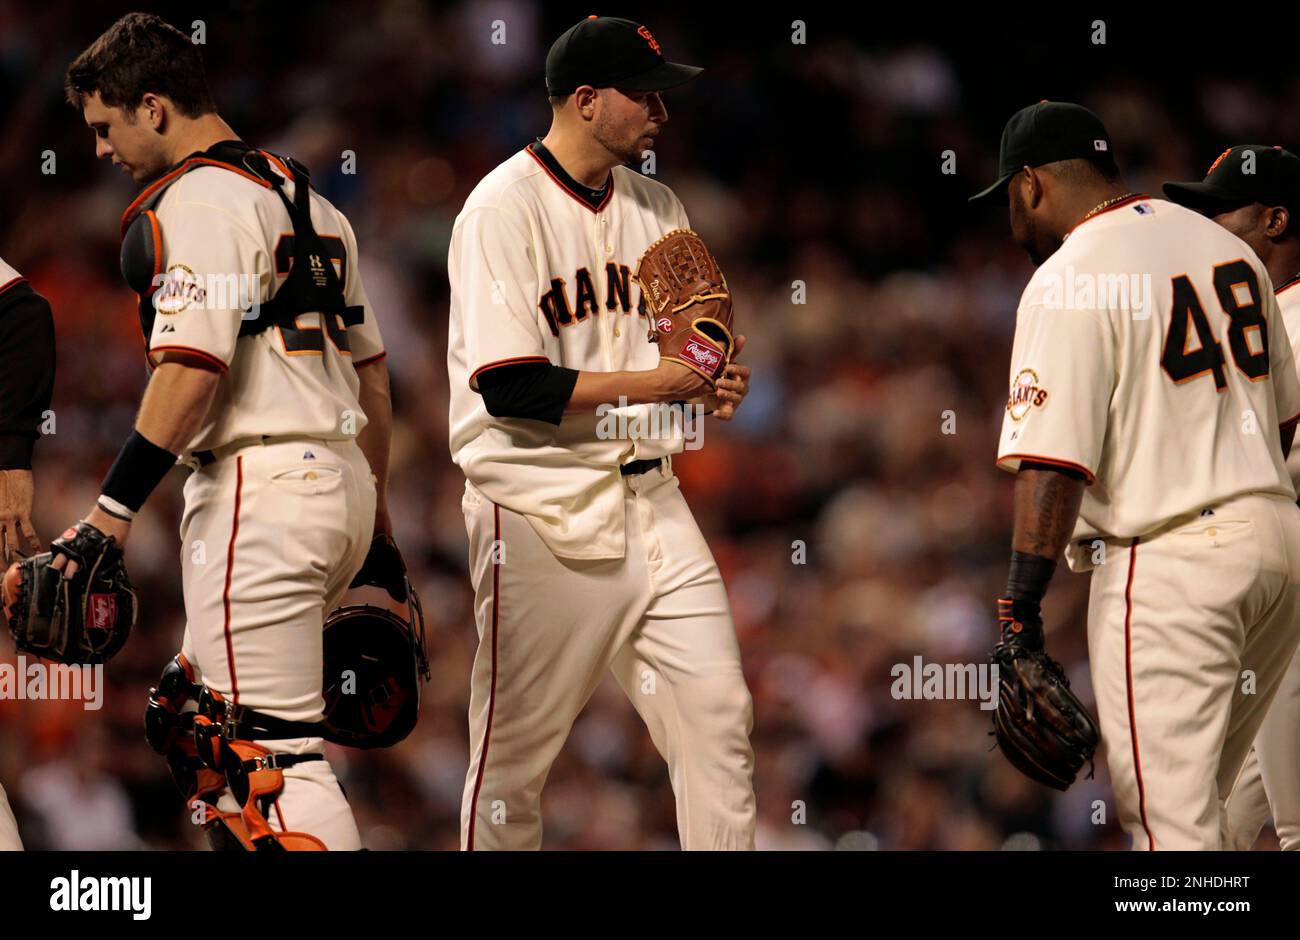 Giants starting pitcher Jonathan Sanchez is joined by catcher Buster Posey  and Pablo Sandoval in the second inning with the bases loaded at AT&T Park  on Tuesday. (Michael Macor/San Francisco Chronicle via